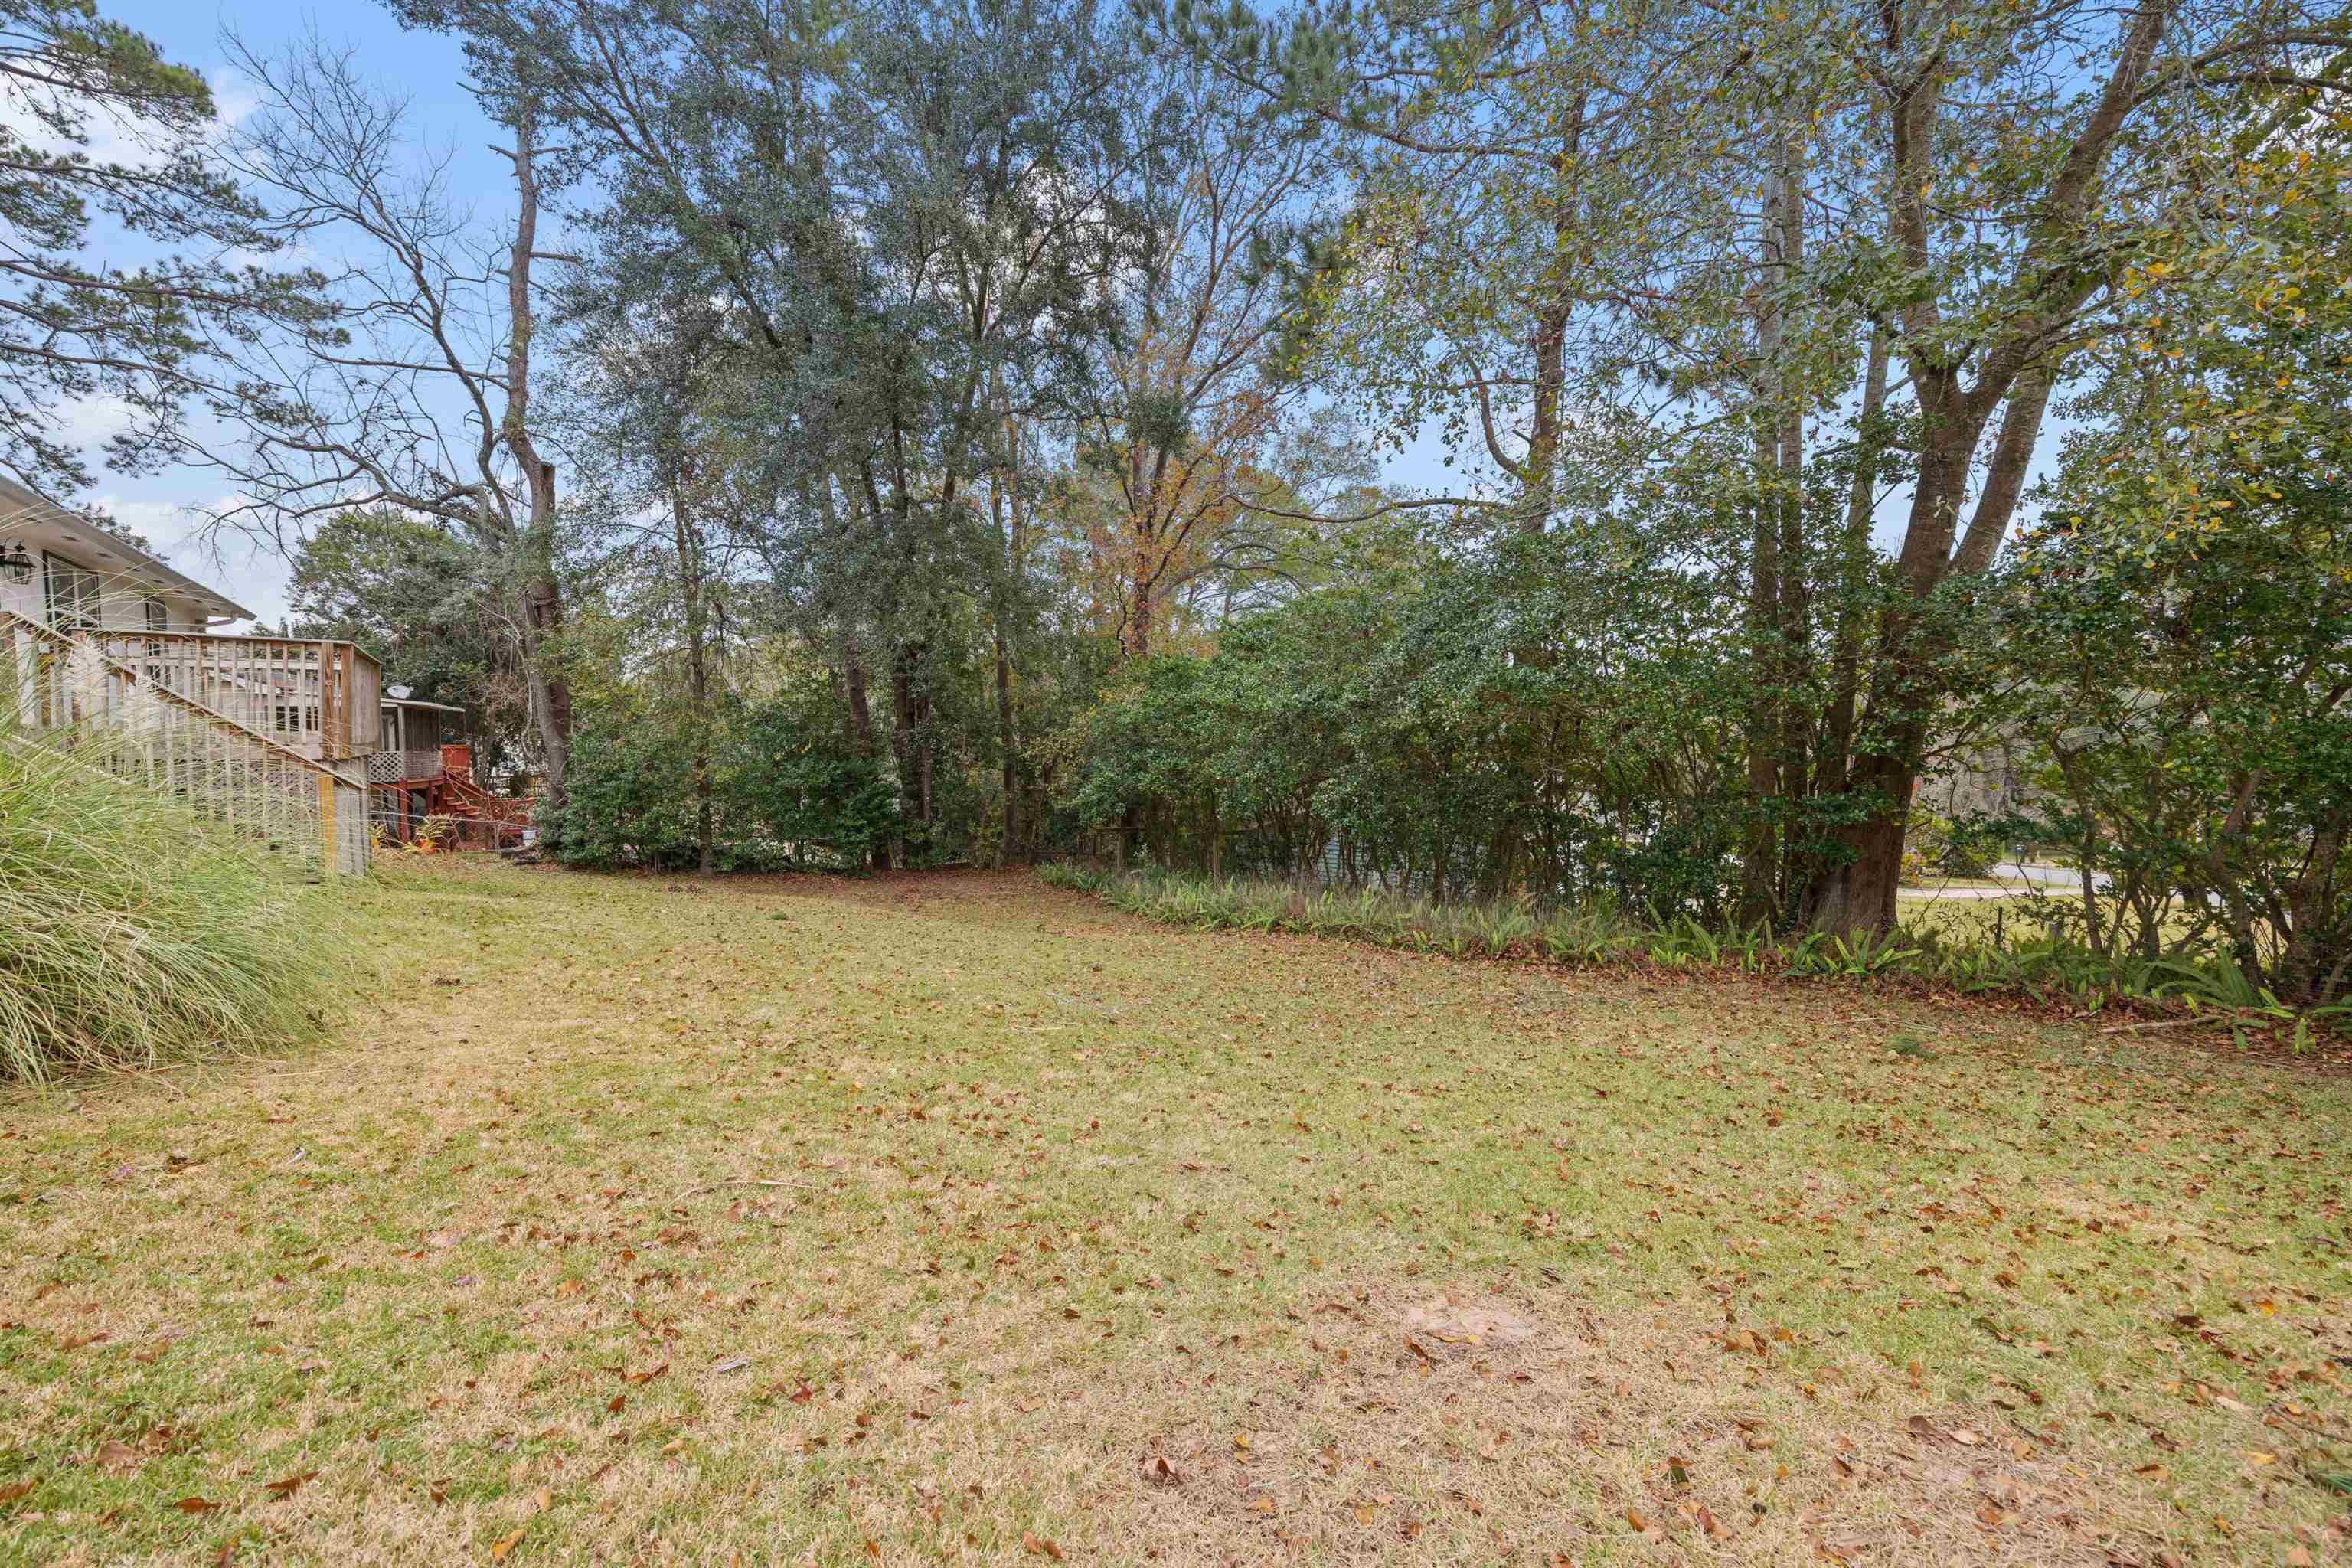 2701 Bedford Dr,TALLAHASSEE,Florida 32308,3 Bedrooms Bedrooms,2 BathroomsBathrooms,Detached single family,2701 Bedford Dr,367402